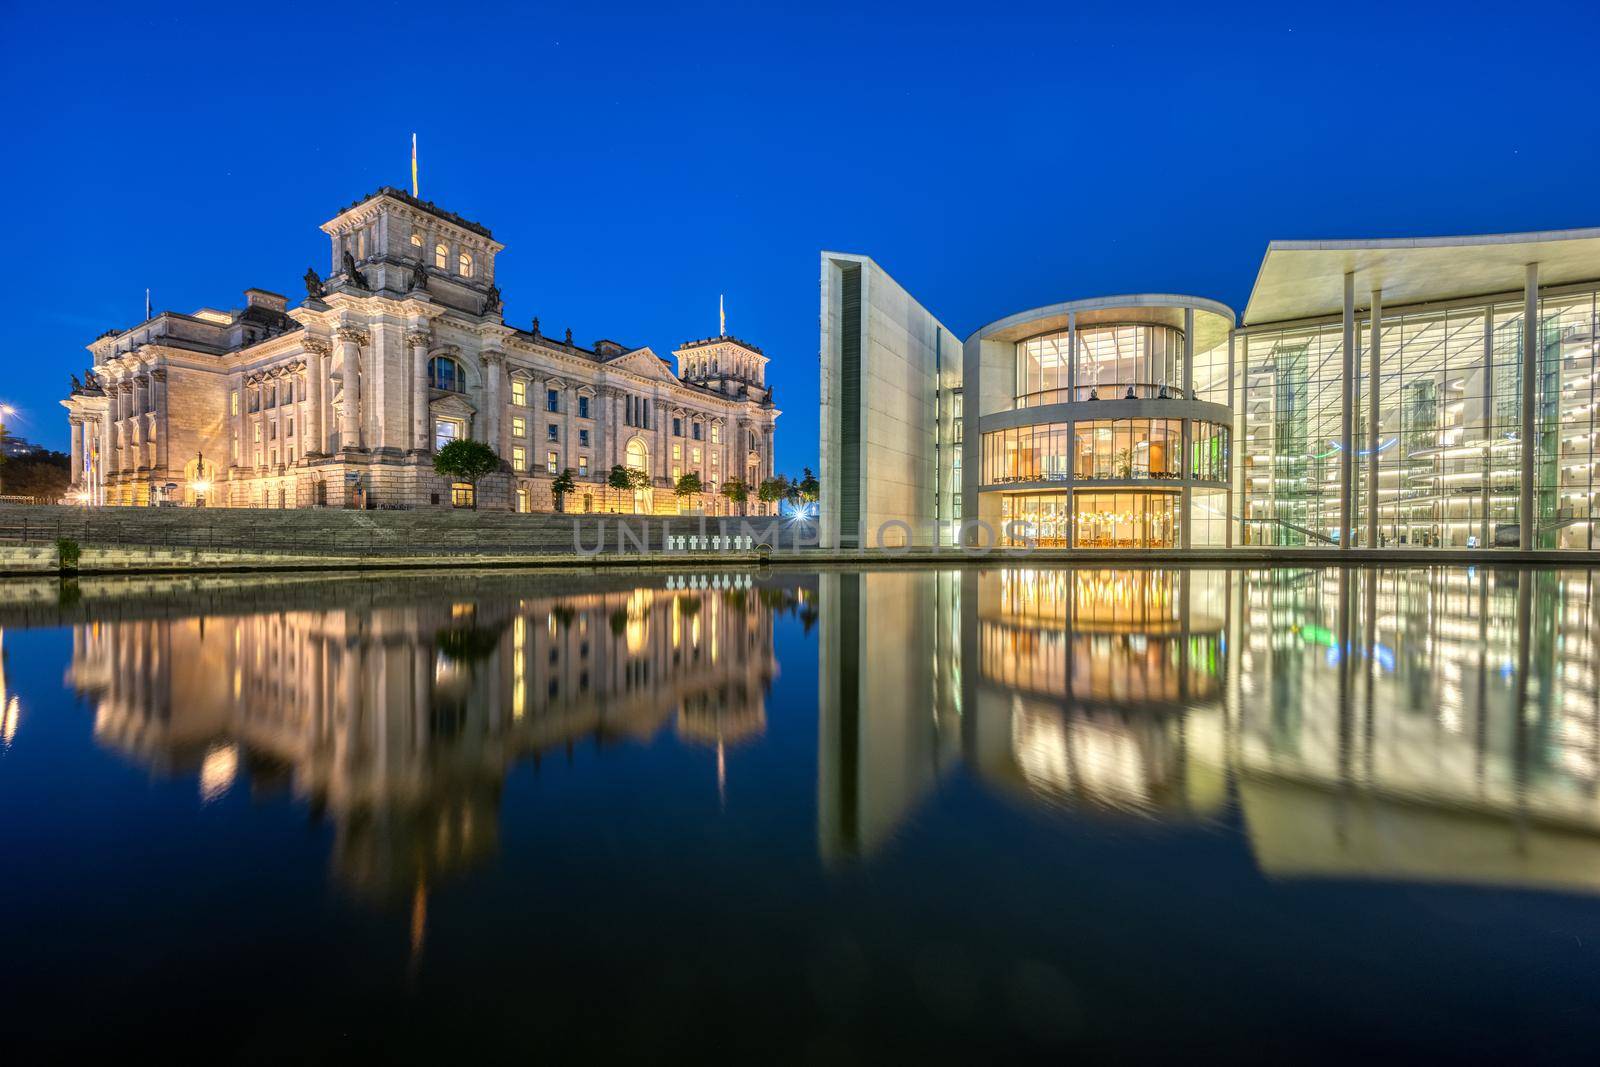 The Reichstag and the Paul-Loebe-Haus at the river Spree in Berlin at night